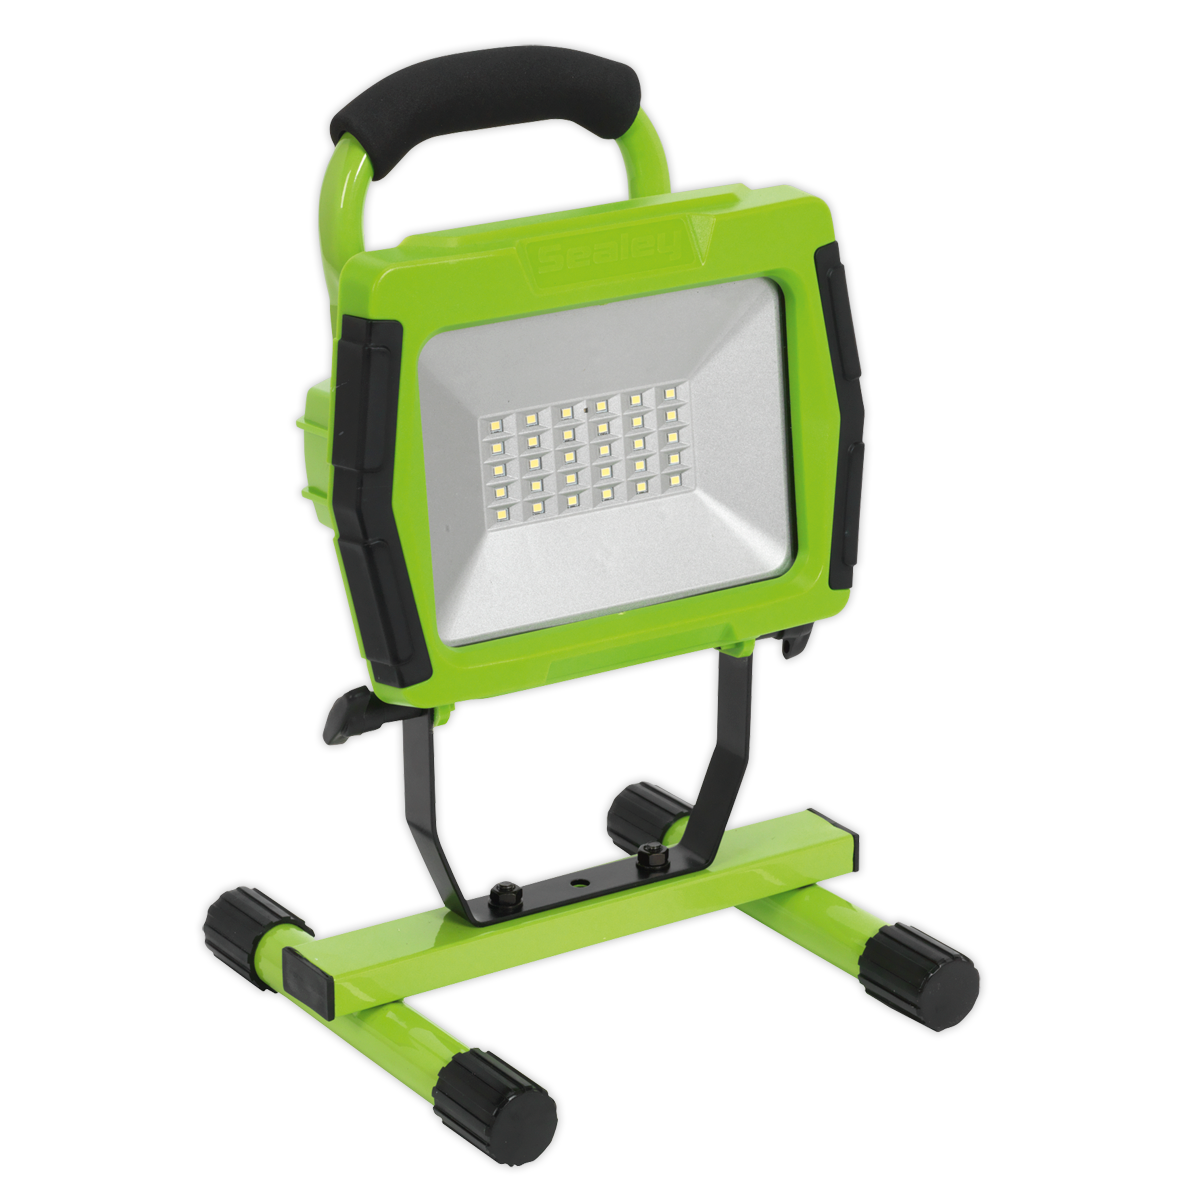 Rechargeable Portable Floodlight 10W SMD LED Lithium-ion - LED109C - Farming Parts